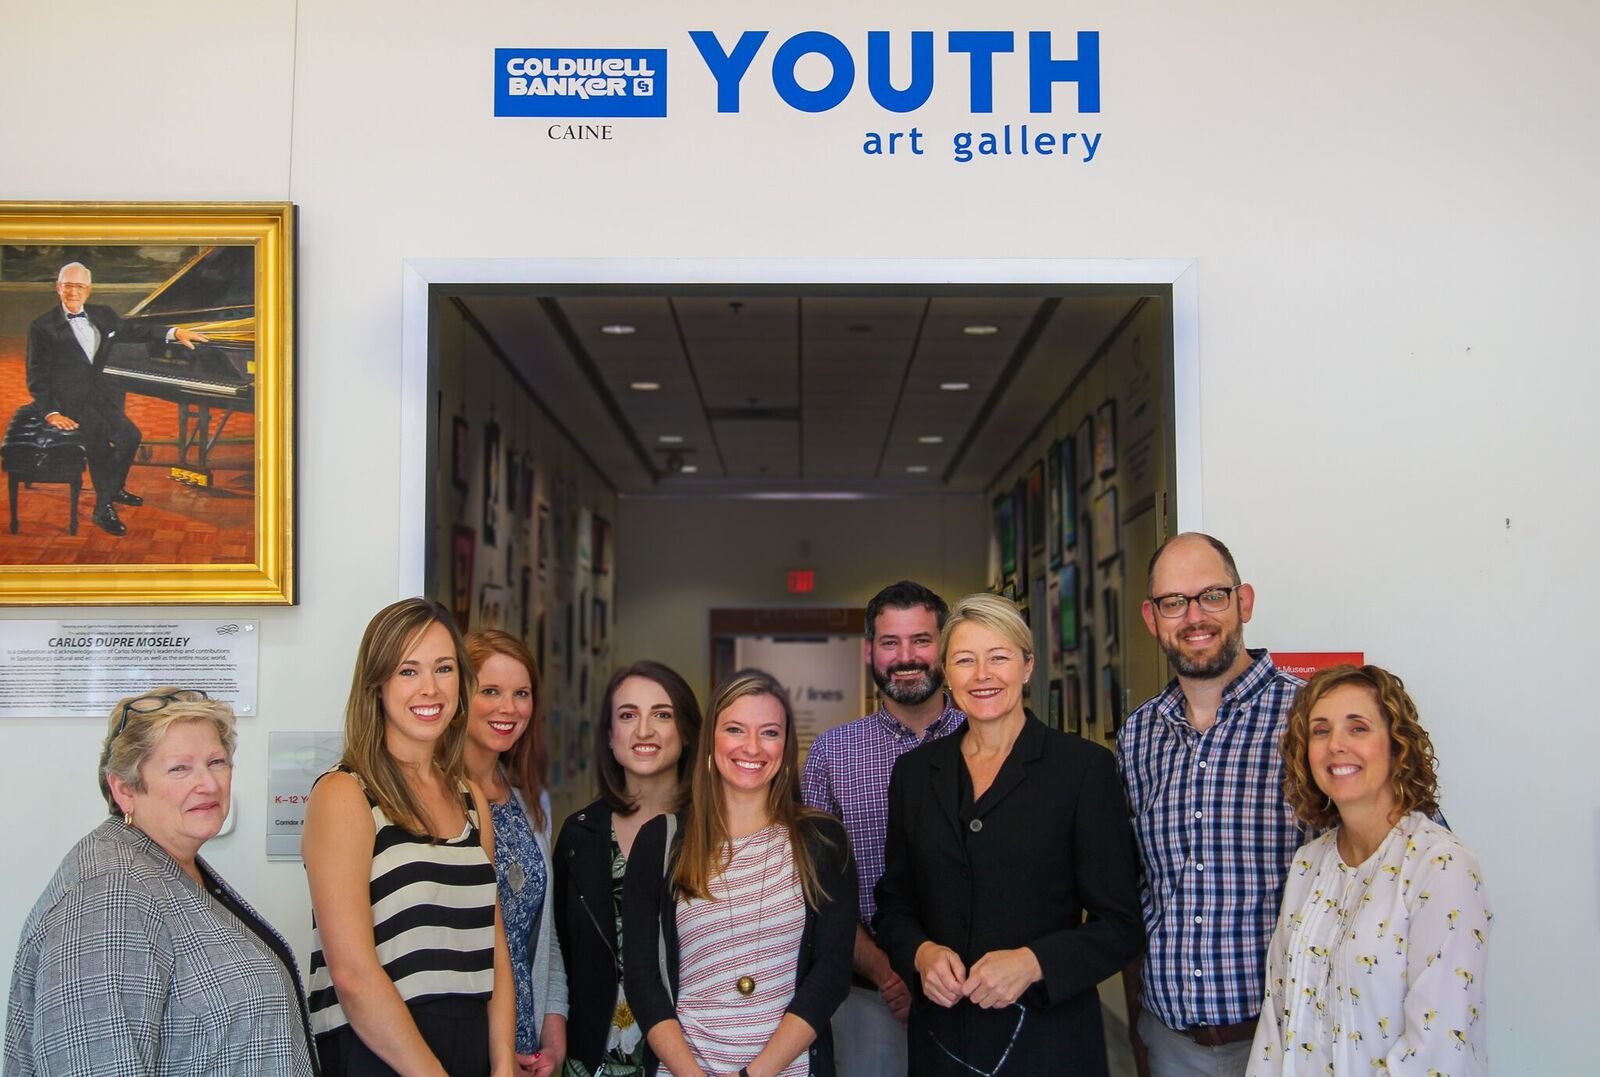 Sponsoring the Chapman Cultural Center's Youth Art Gallery